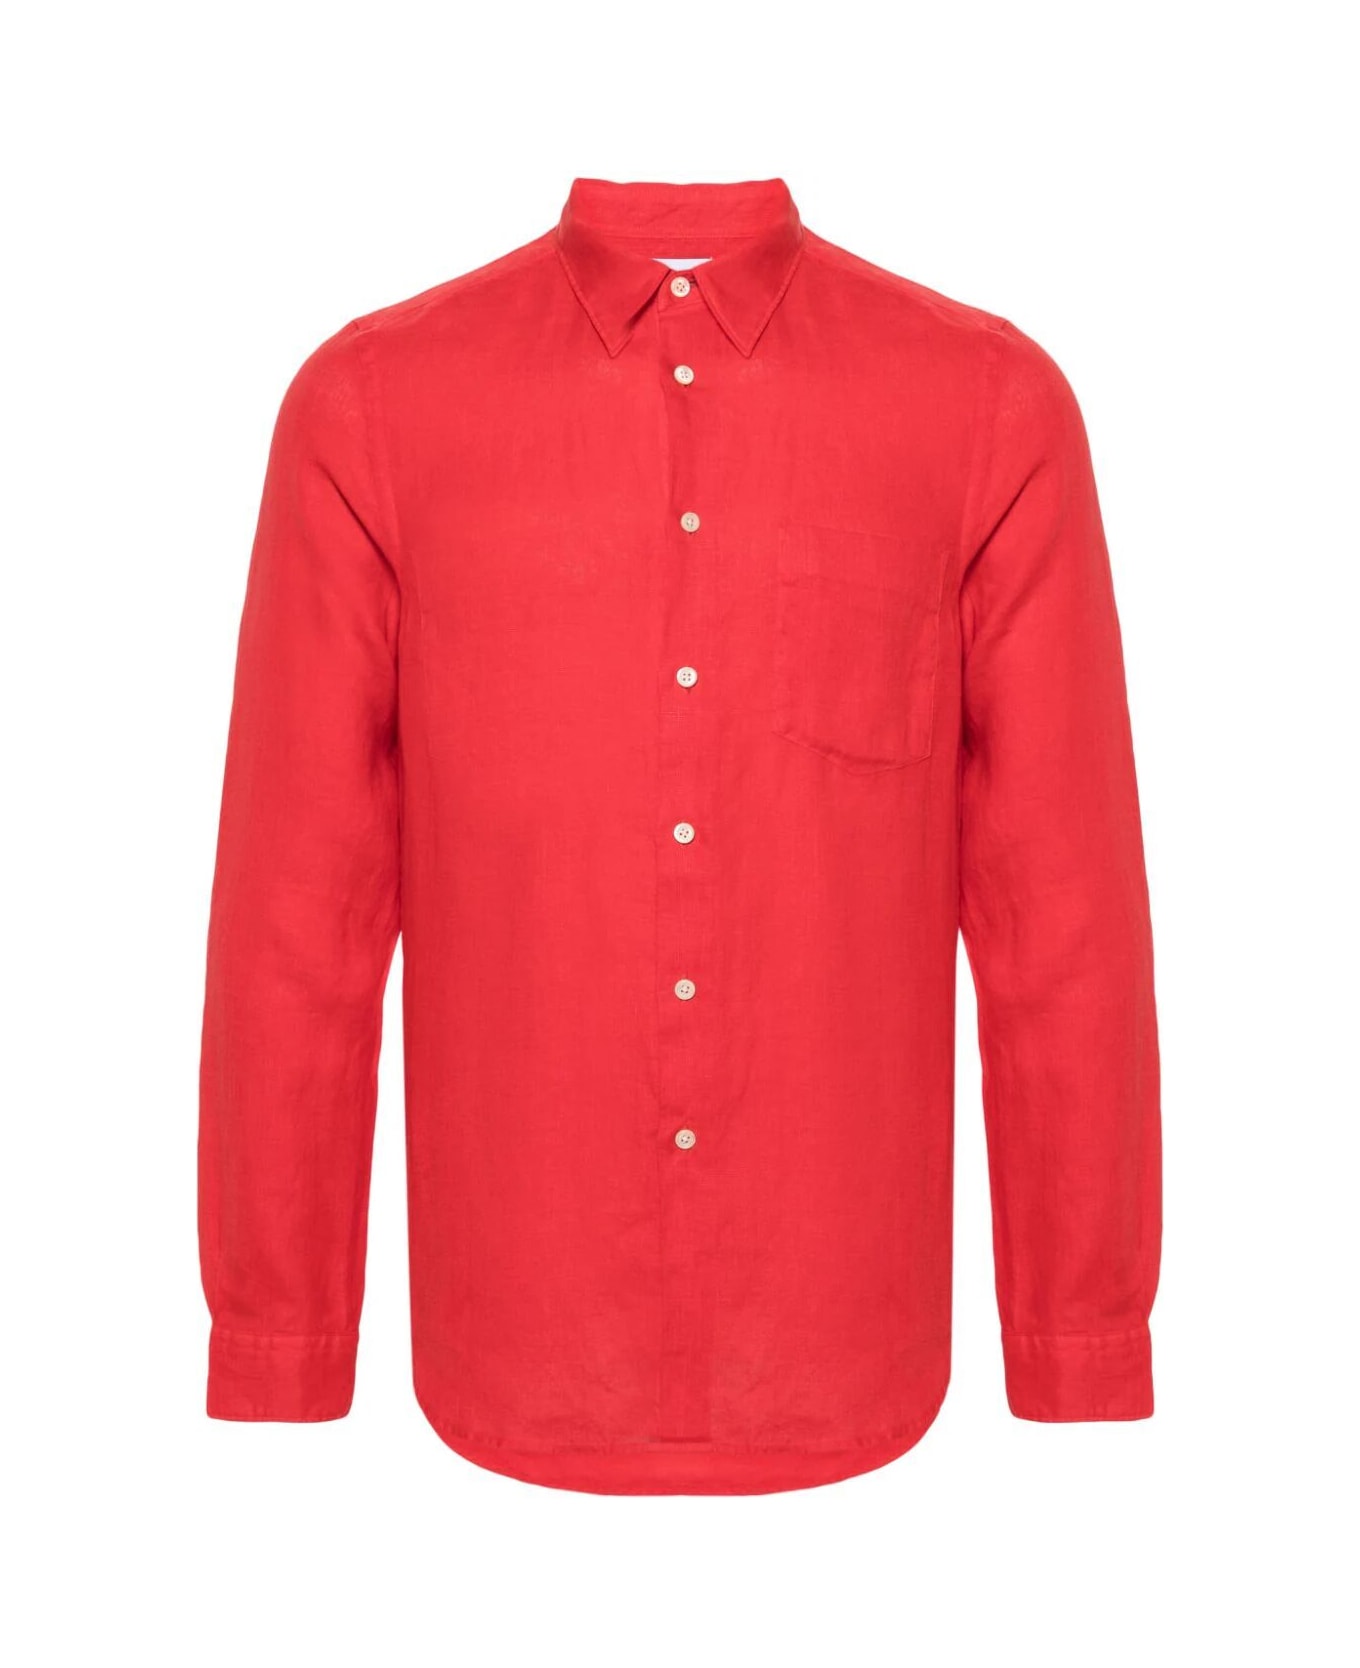 PS by Paul Smith Mens Ls Tailored Fit Shirt - Reds